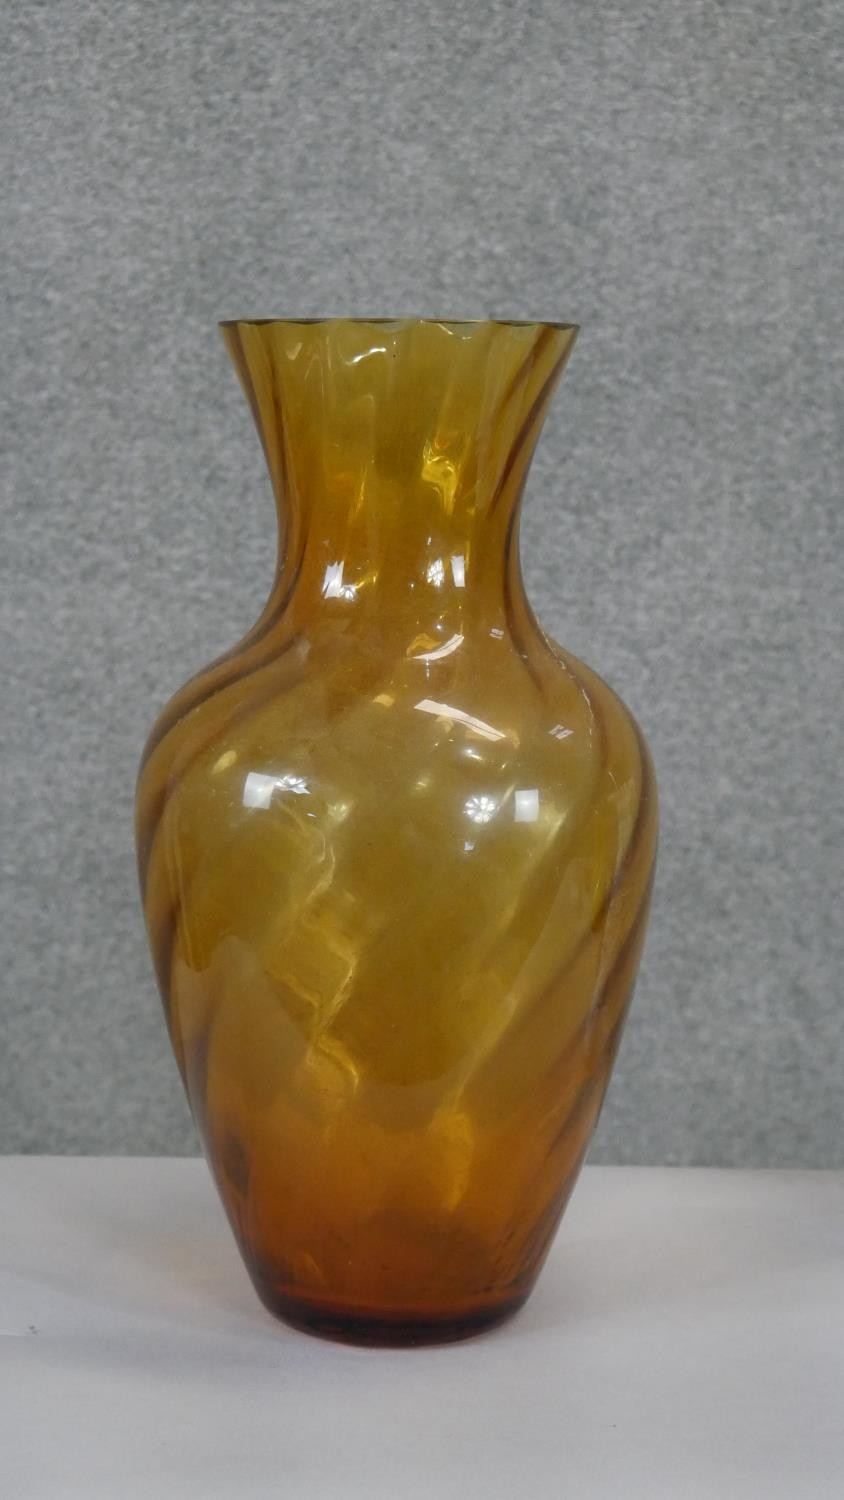 A collection of vintage and antique glass vases. Including two vintage opaque yellow glass vases, an - Image 3 of 6